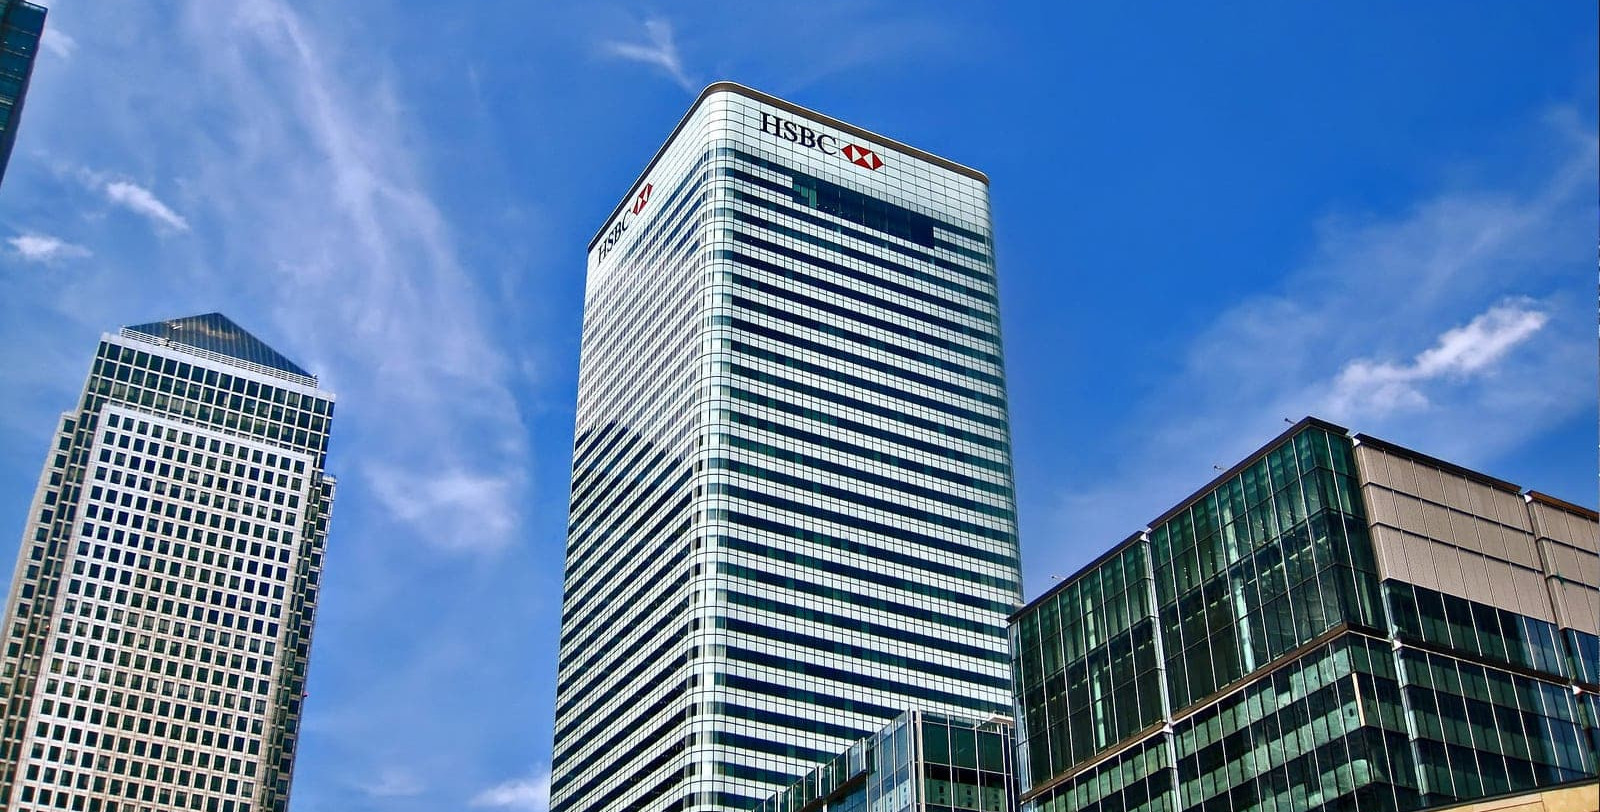 HSBC plans radical 40% cut in office space - https://roomslocal.co.uk/blog/hsbc-plans-radical-40-cut-in-office-space #plans #radical #office #space #plans